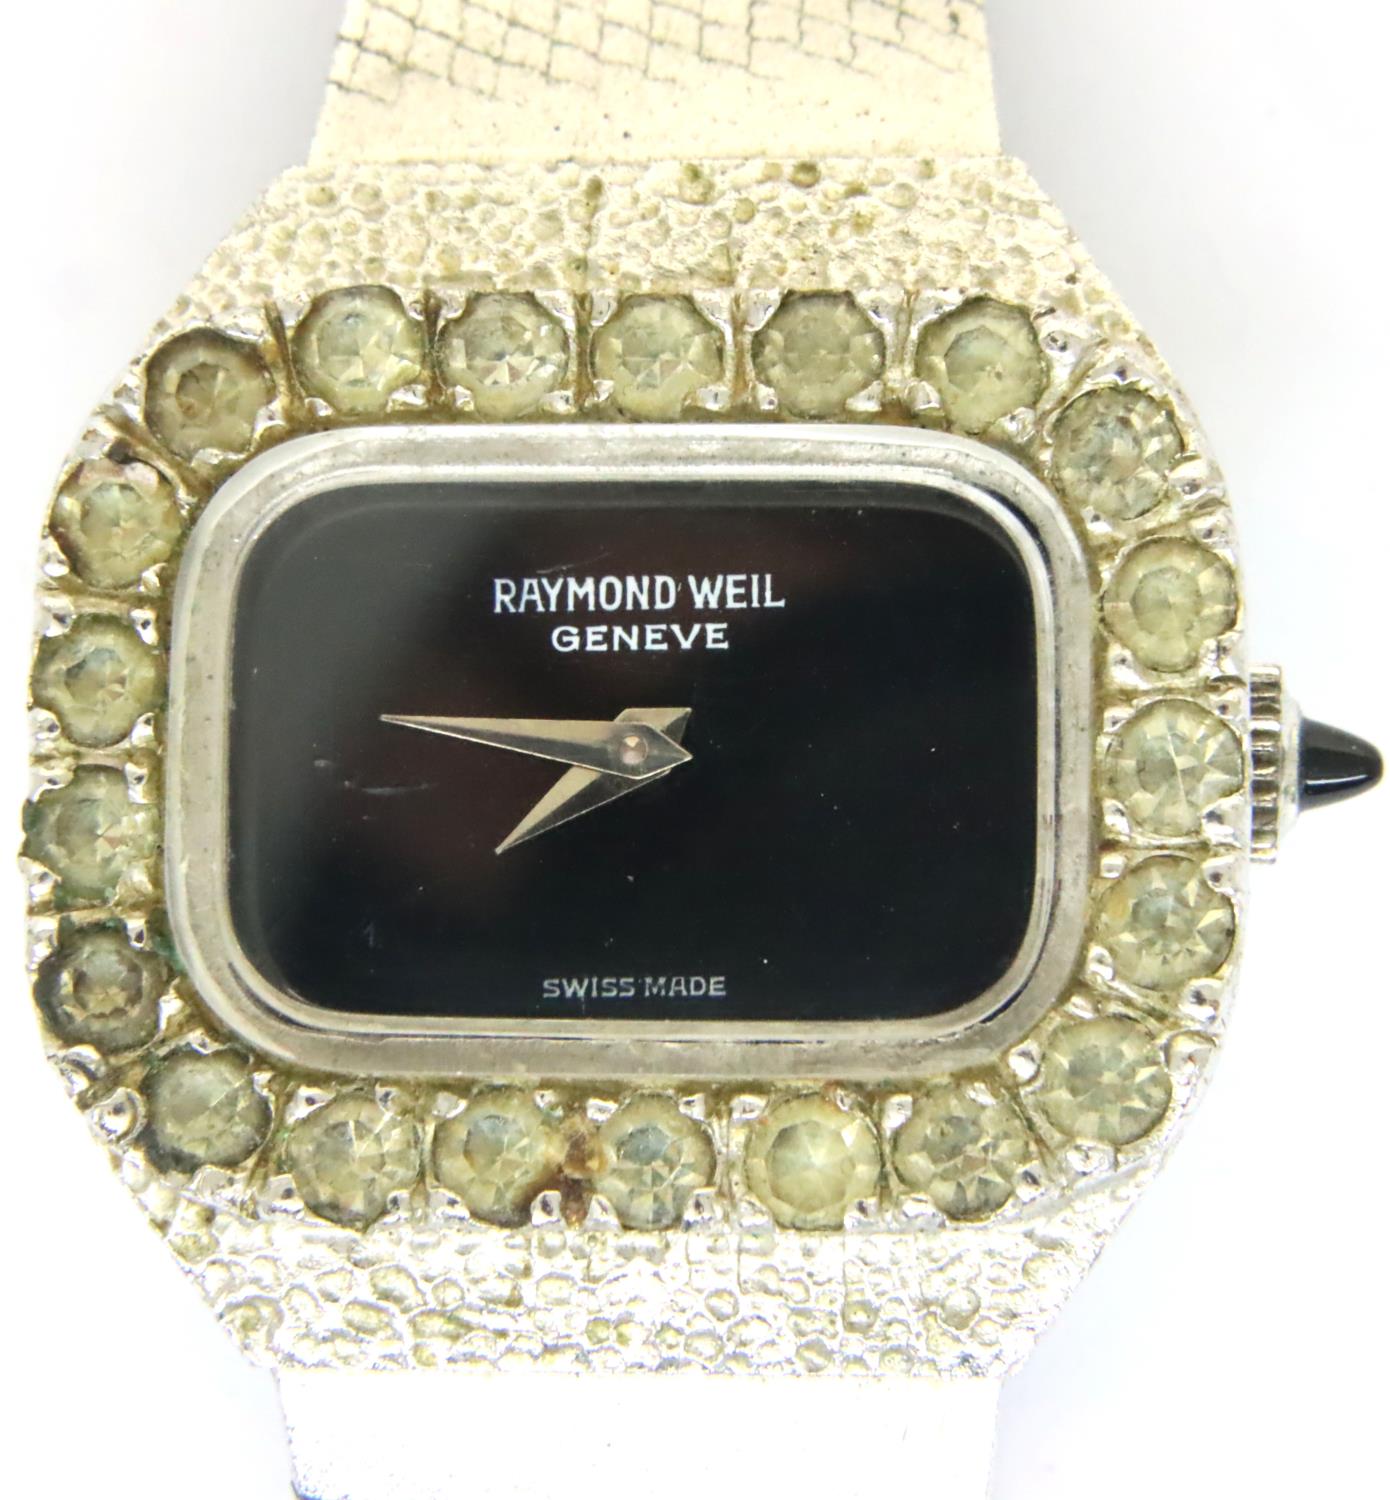 Raymond Weil; ladies cocktail wristwatch on a stainless steel bracelet. P&P Group 1 (£14+VAT for the - Image 2 of 3